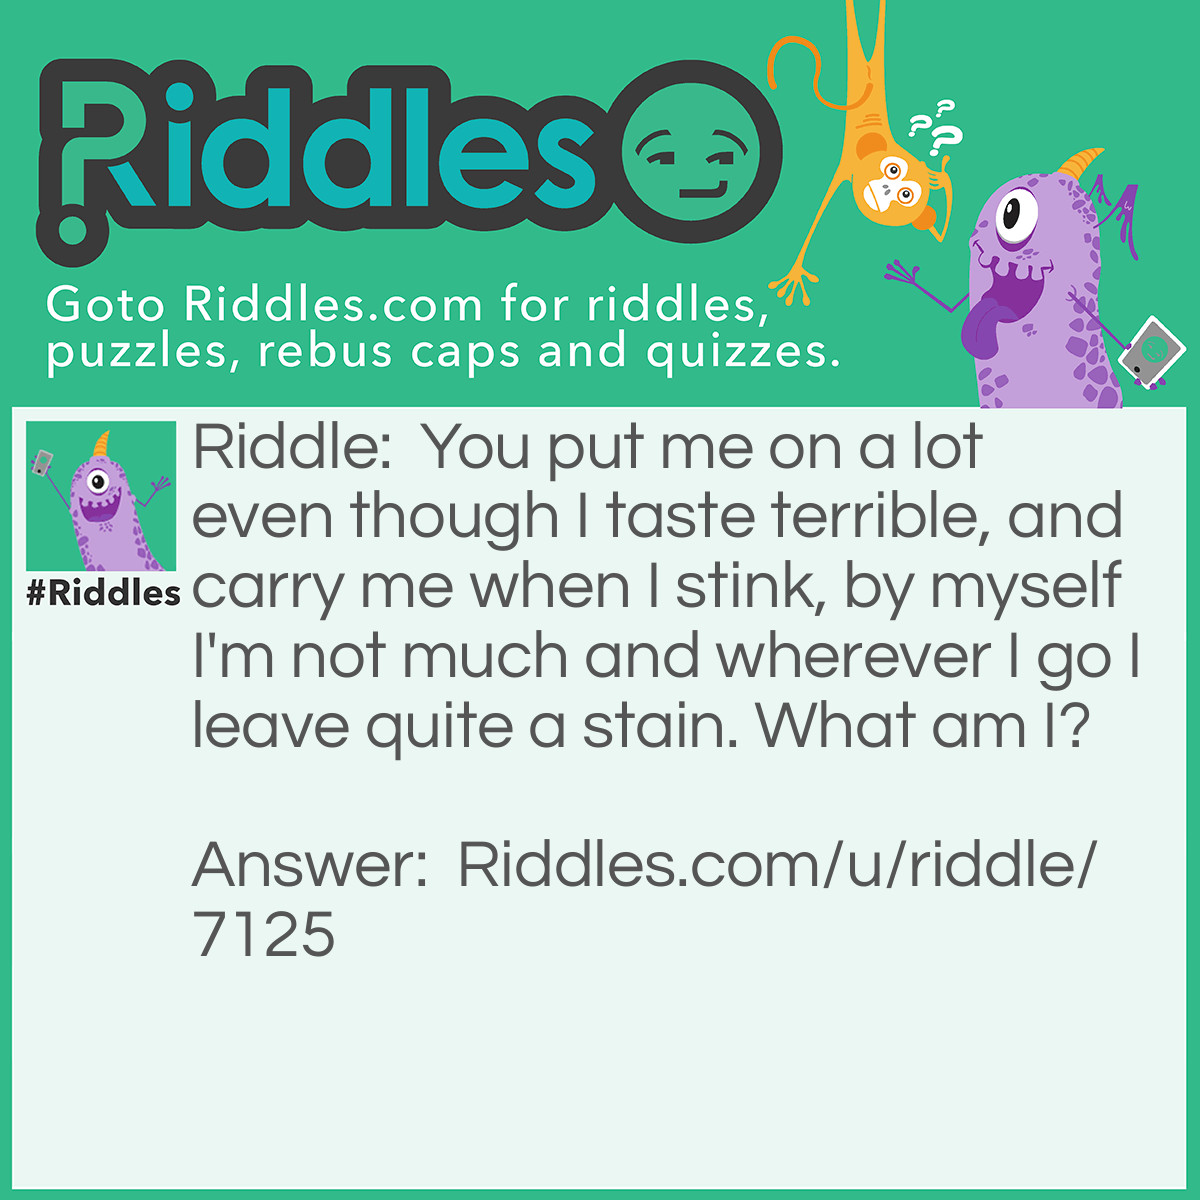 Riddle: You put me on a lot even though I taste terrible, and carry me when I stink, by myself I'm not much and wherever I go I leave quite a stain. What am I? Answer: Paint in a can.